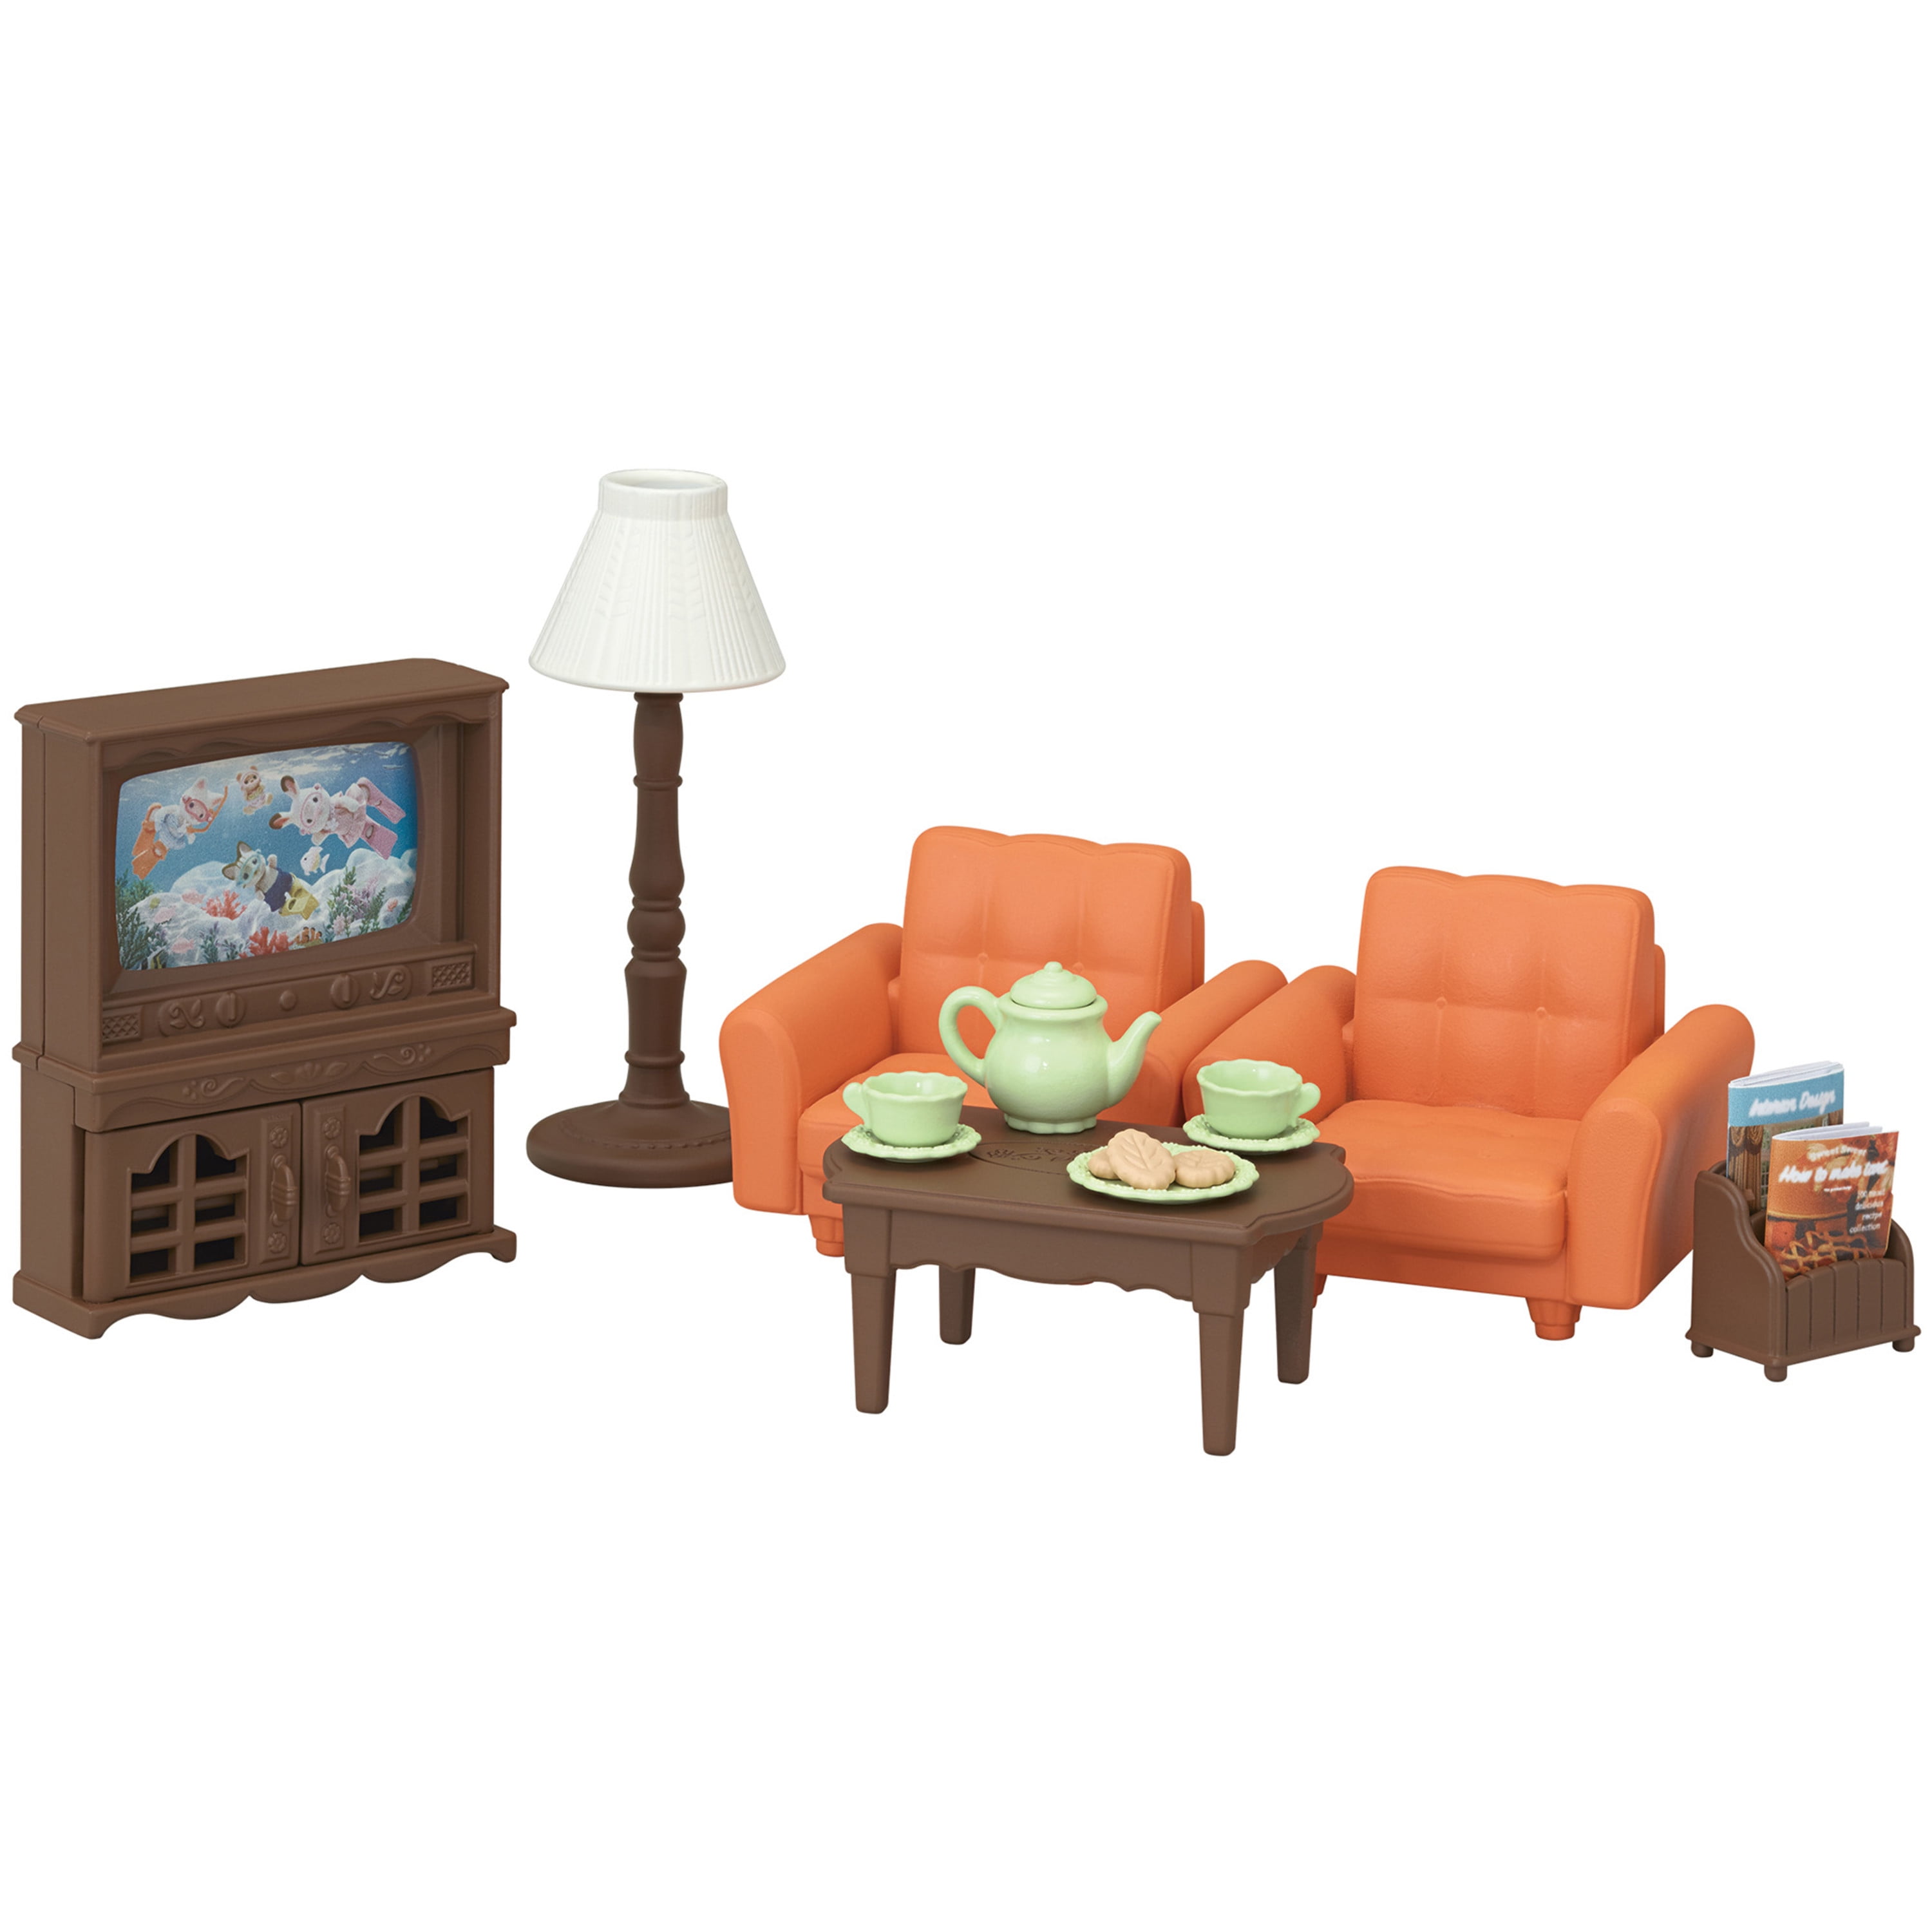 Calico Critters Microwave Cabinet Dollhouse Furniture Set CC1835 for sale online 